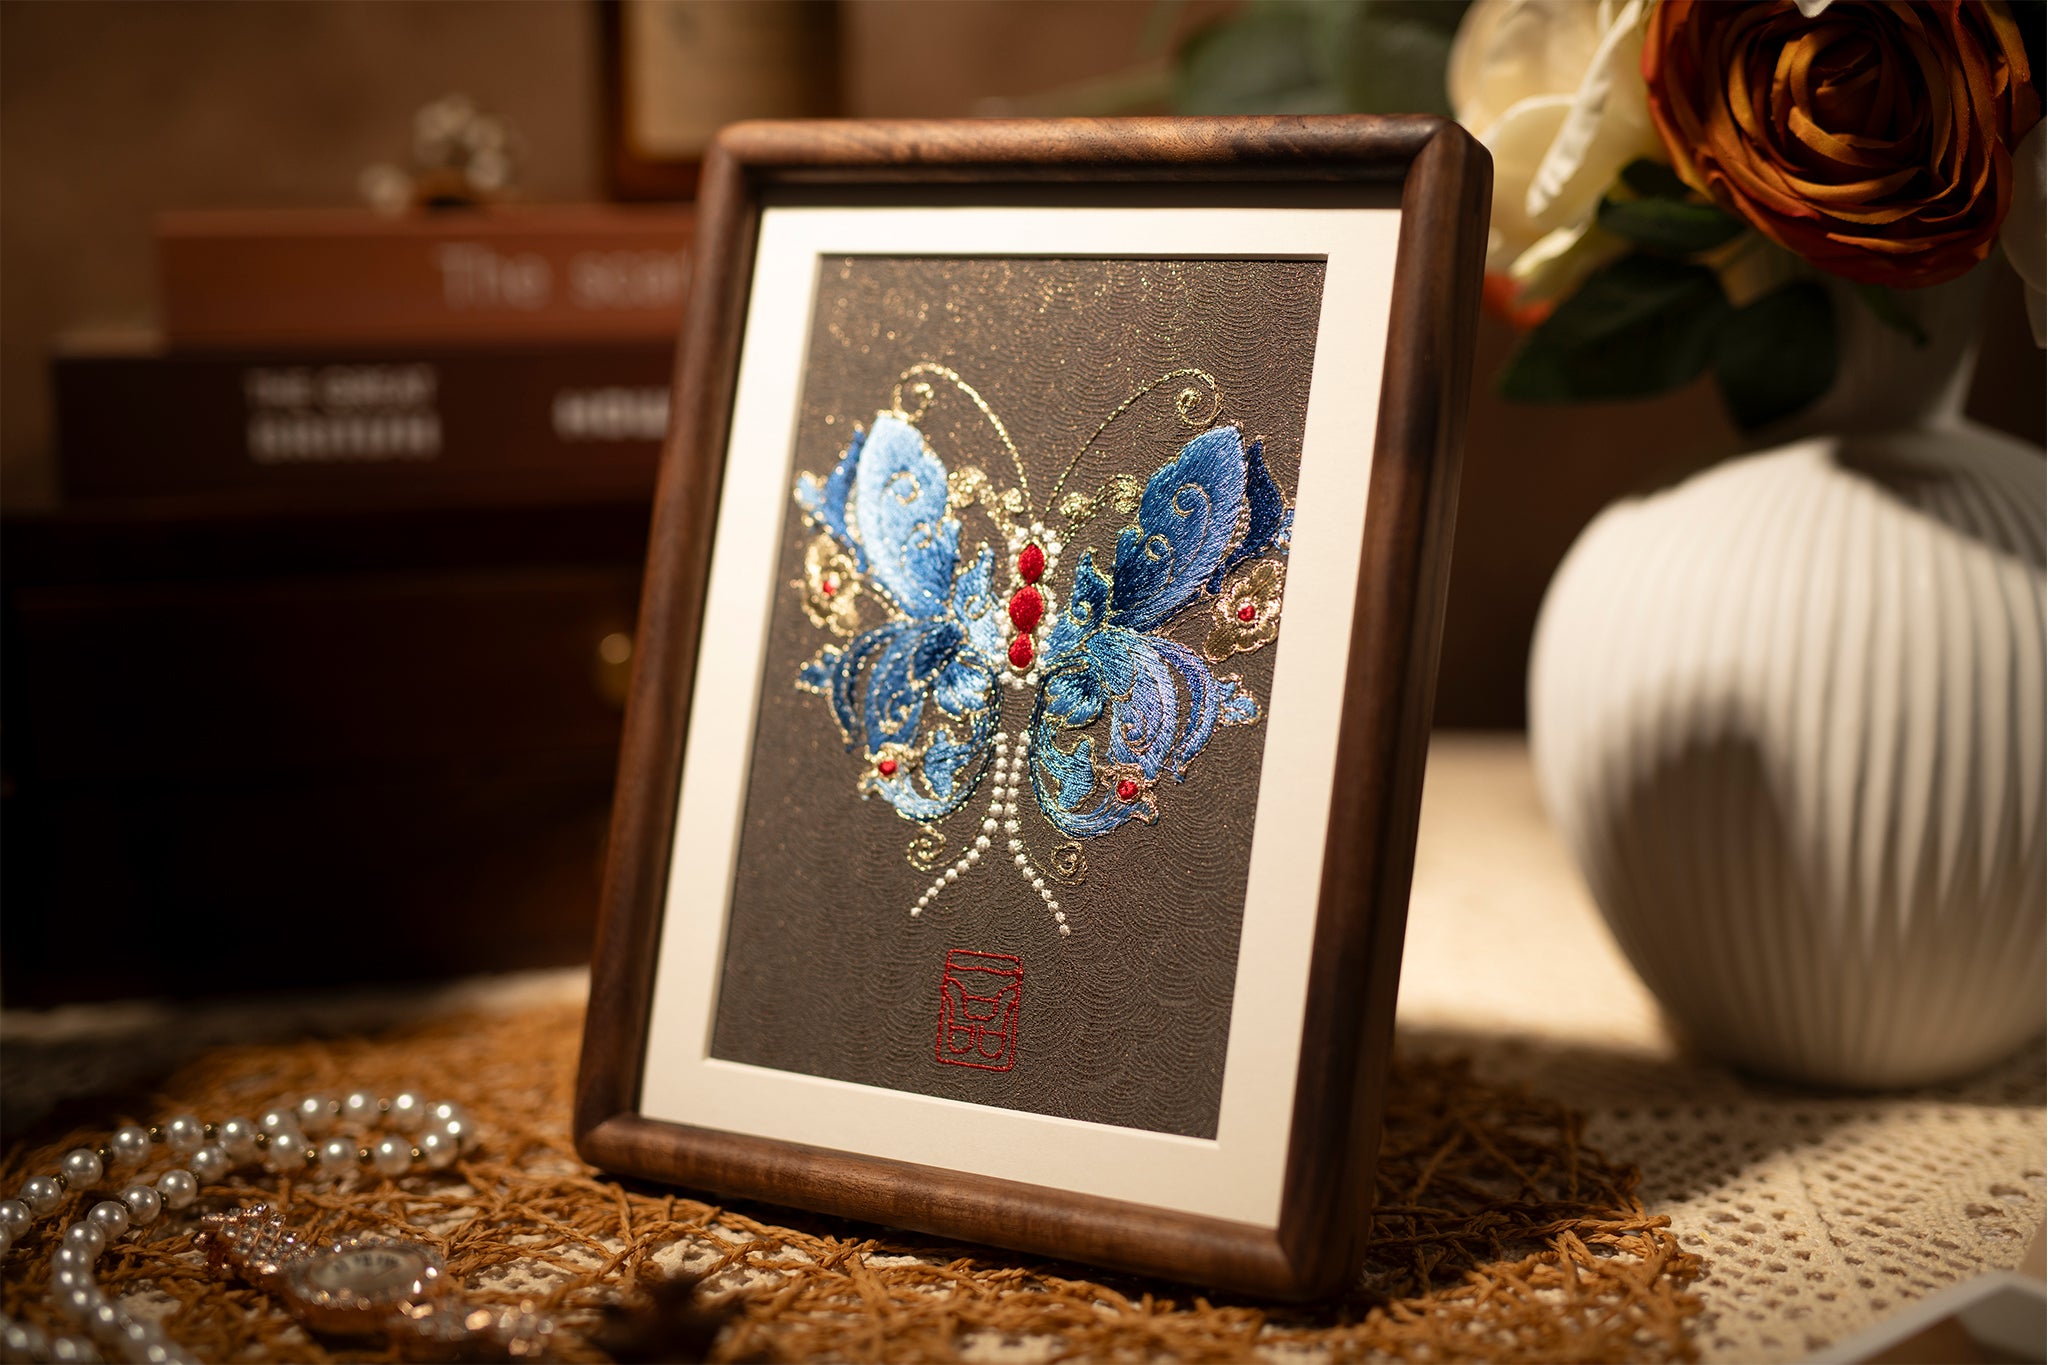 A wood-framed embroidered artwork showing beautiful blue butterfly, paired with flowers and jewelry and scented candles, is placed on the tabletop.